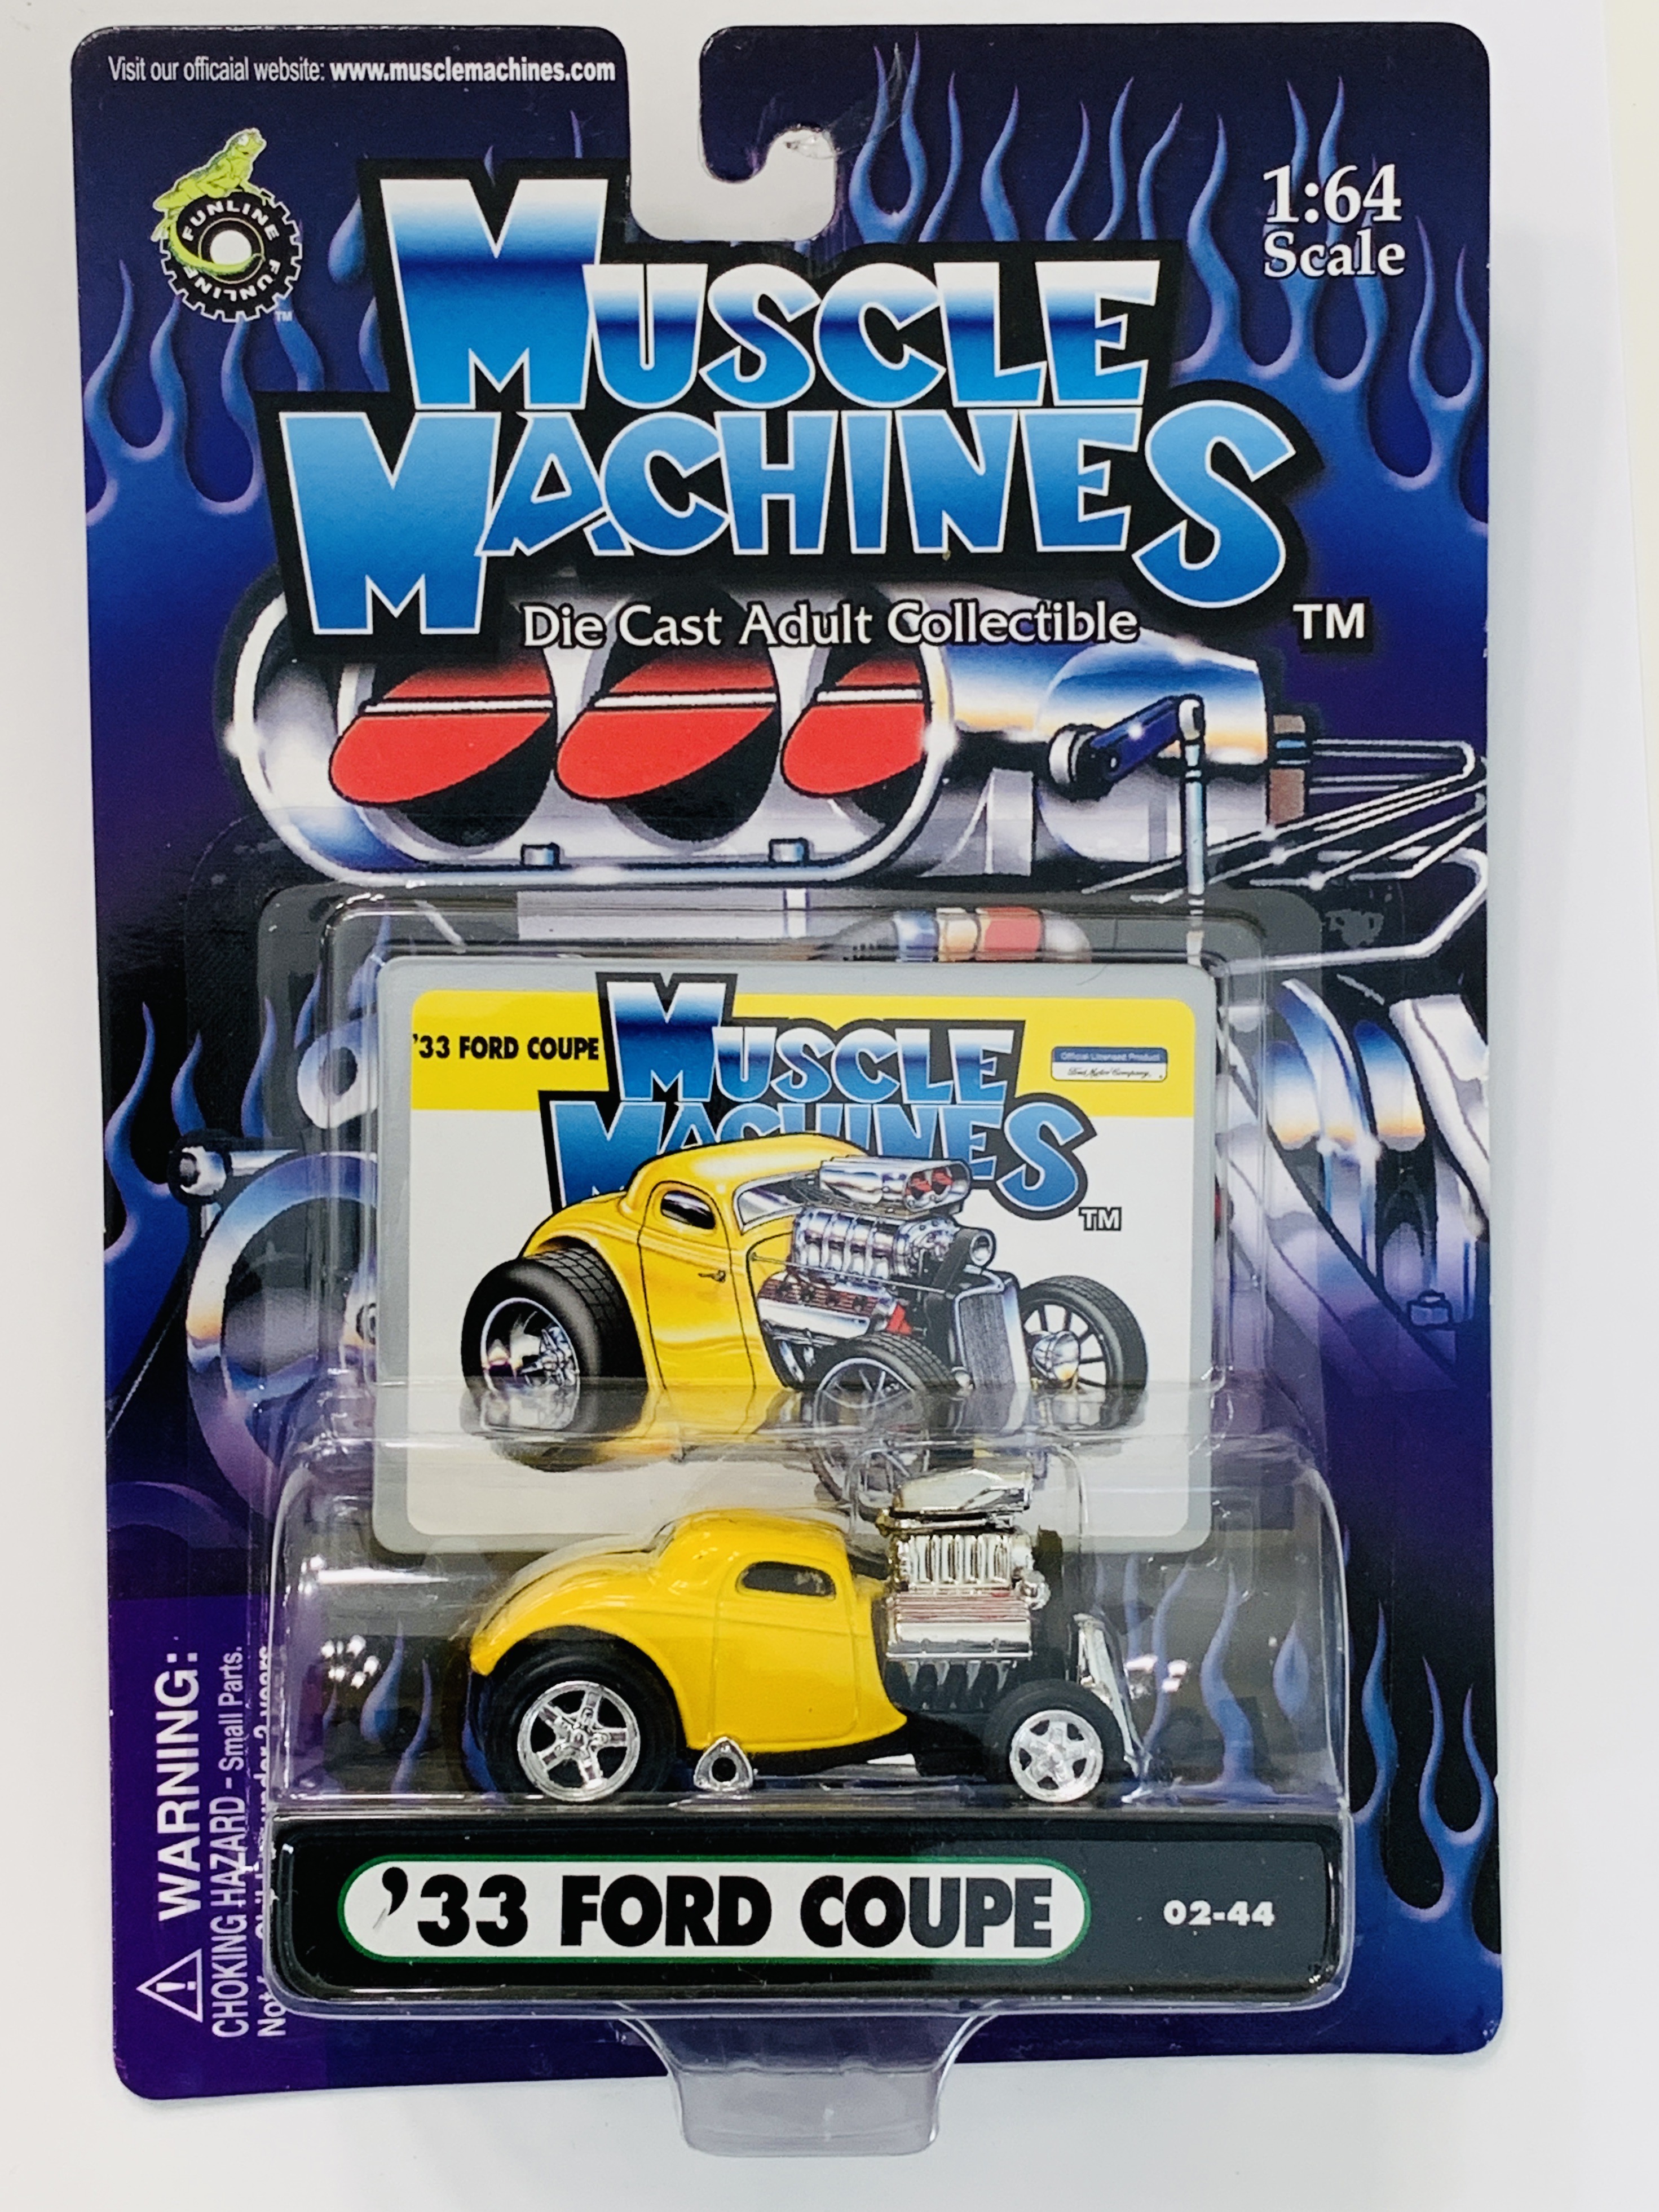 Muscle Machines '33 Ford Coupe 02-44